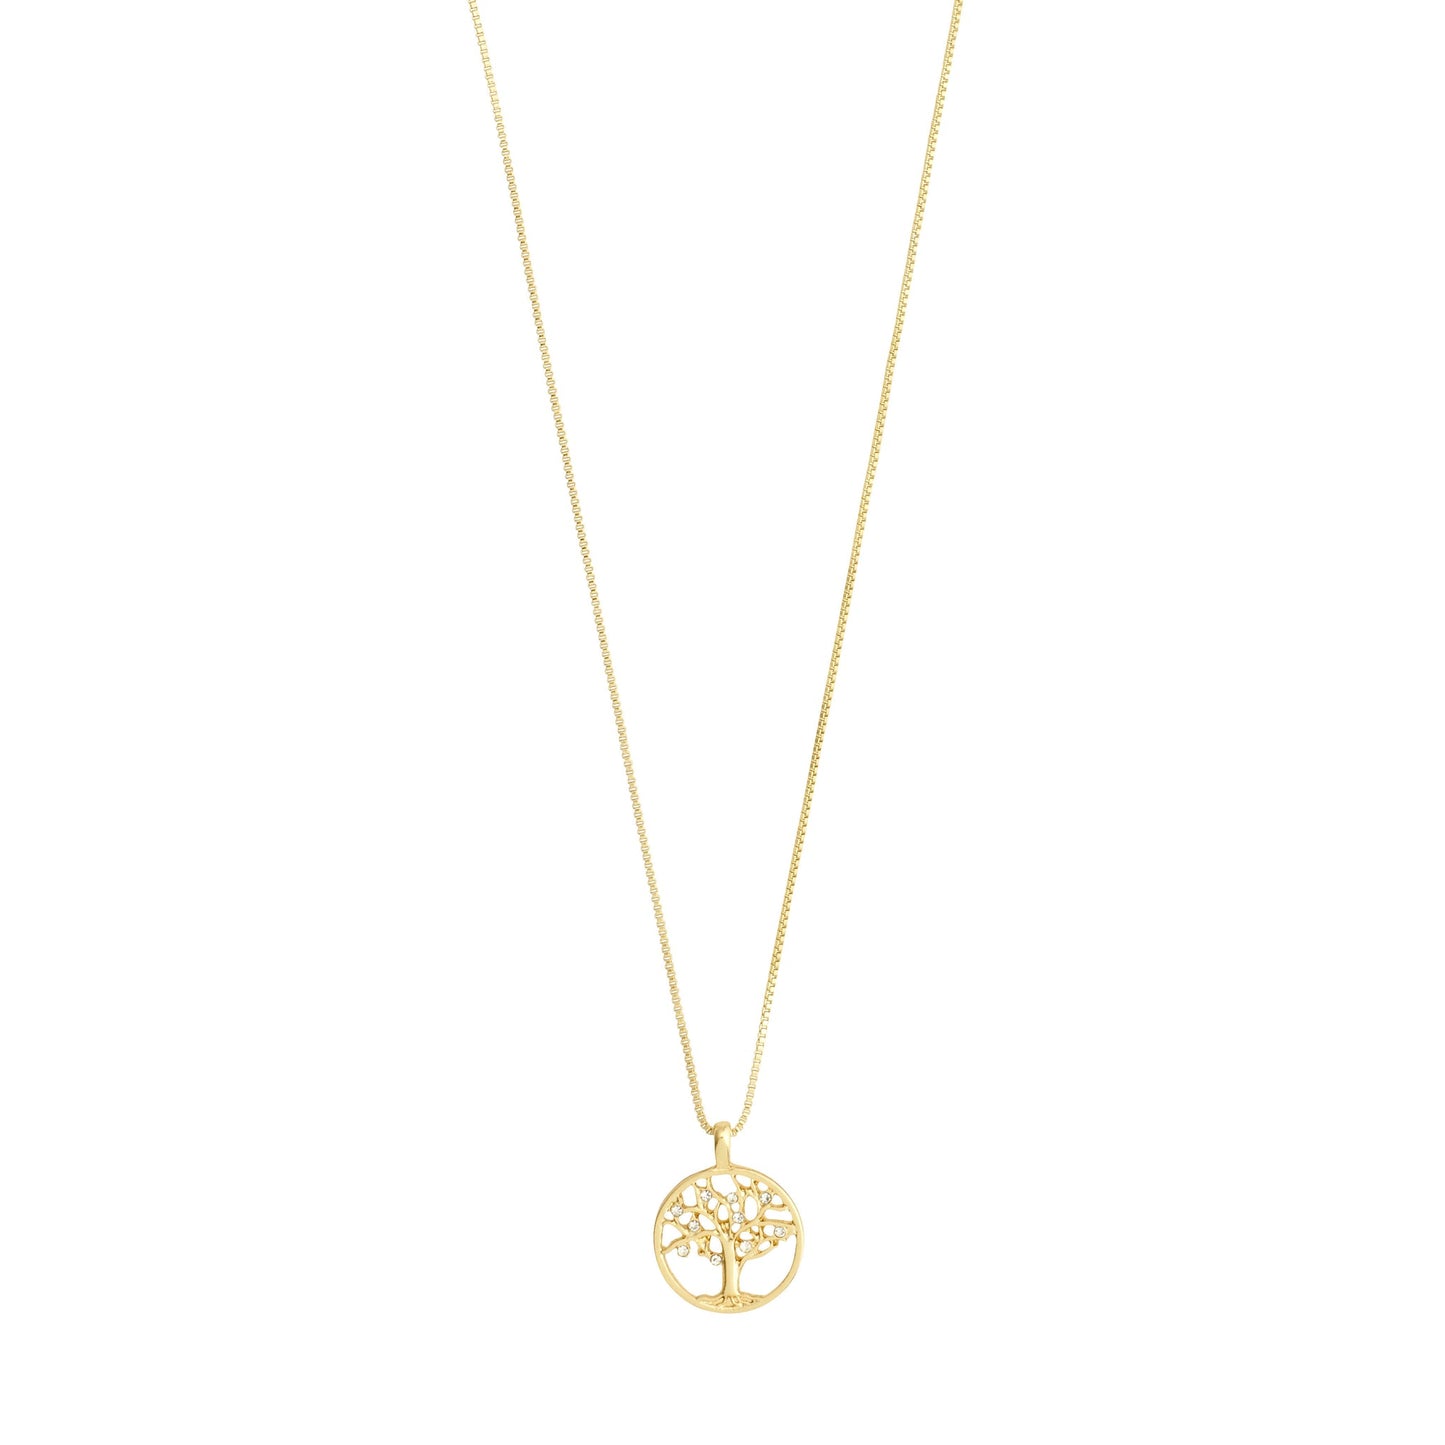 IBEN Recycled Tree of Life Necklace - Gold Plated